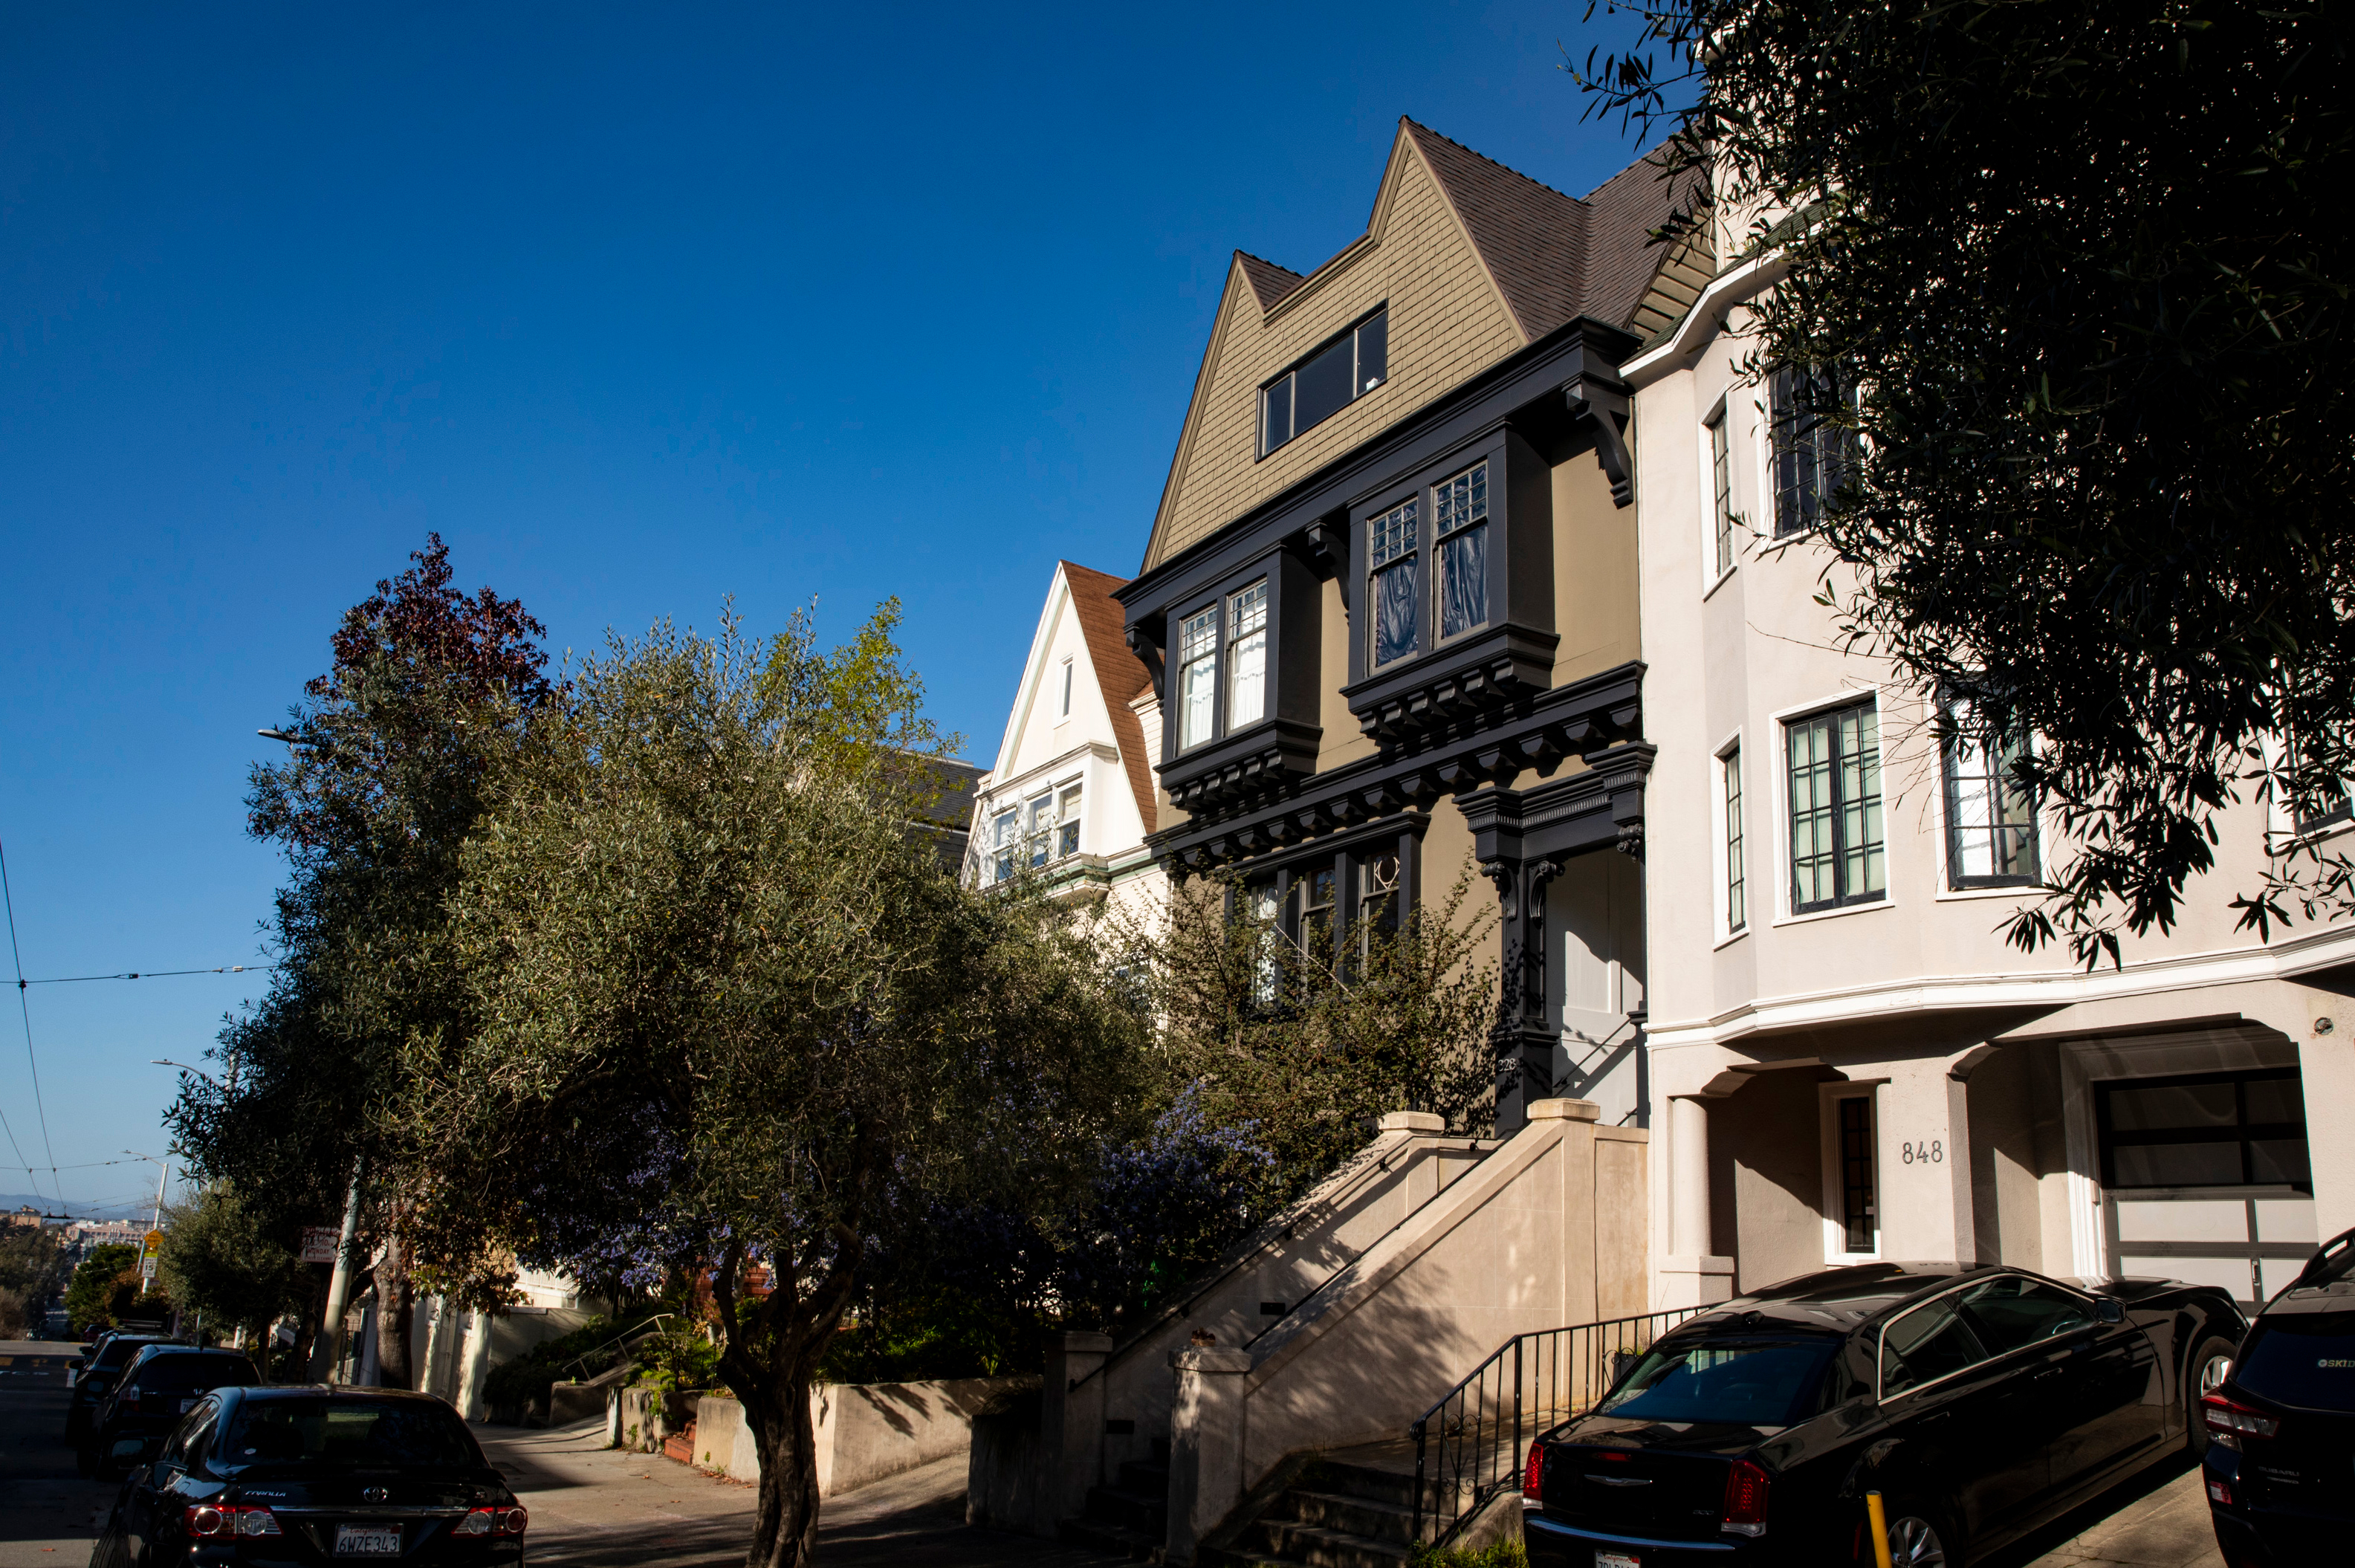 Property Photo: Side street view of 828 Ashbury, showing near by homes and tree-lined street